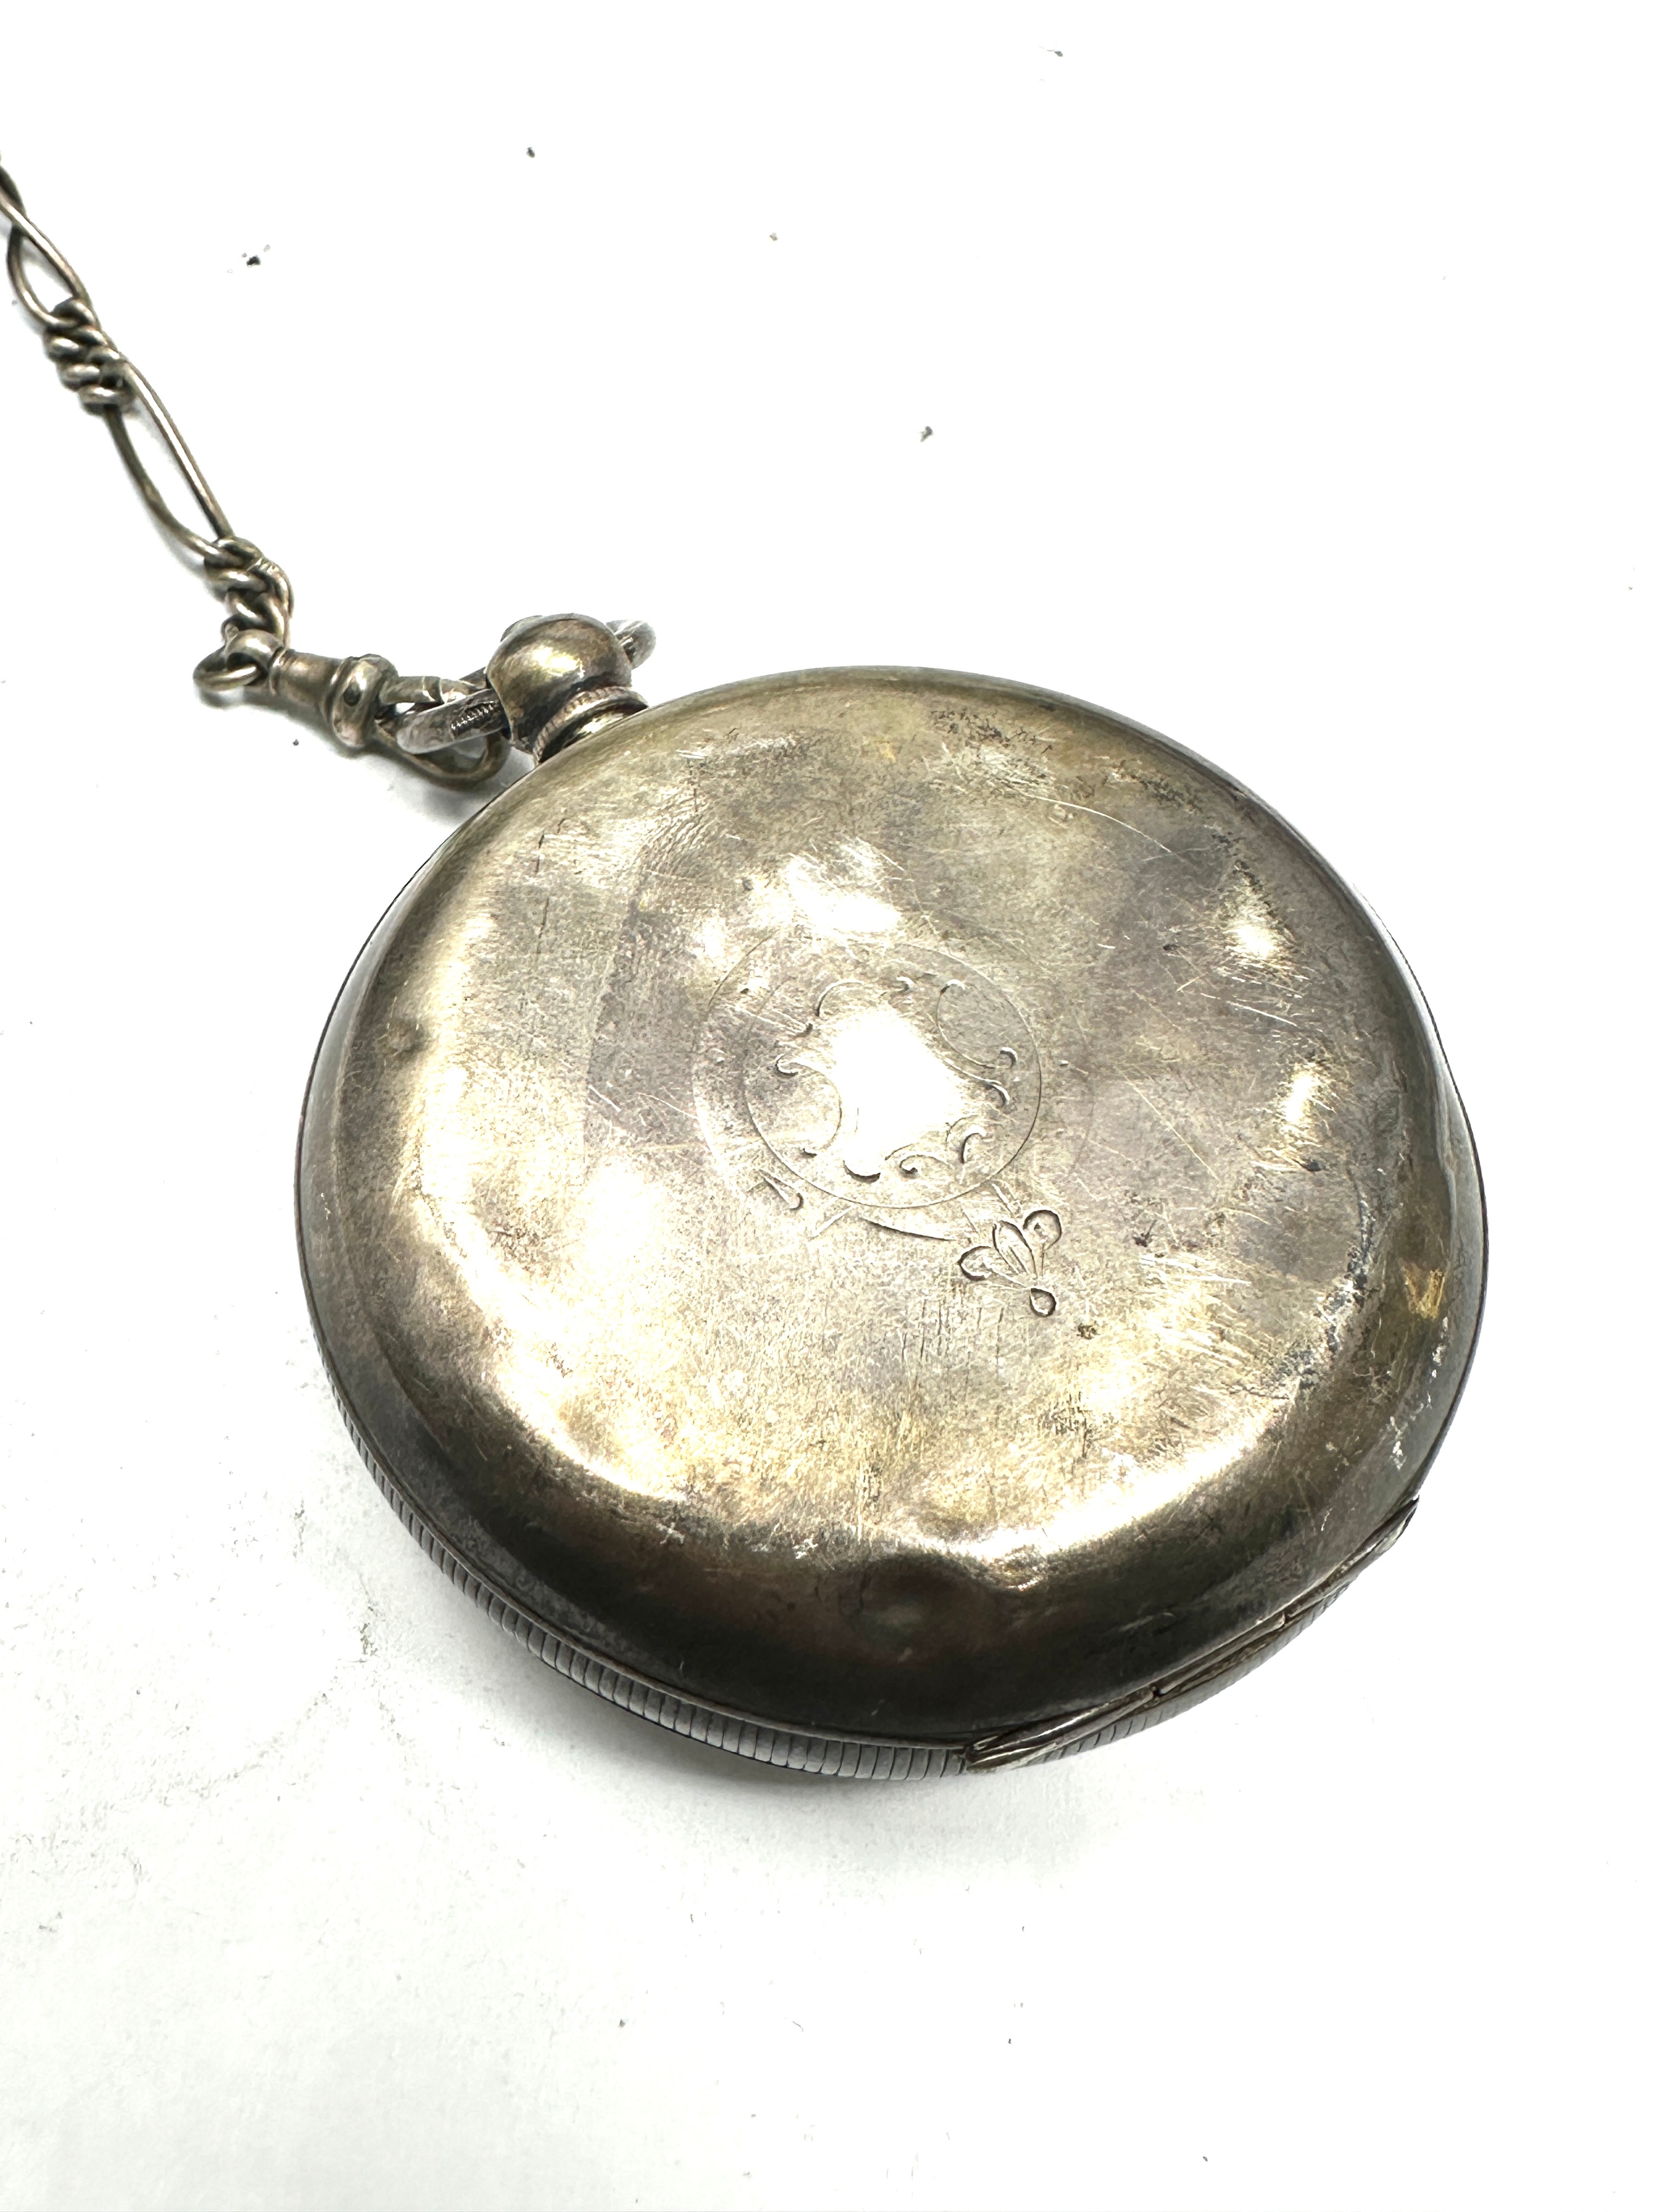 Antique silver open face pocket watch the watch is ticking with silver watch chain no t-bar - Image 2 of 3